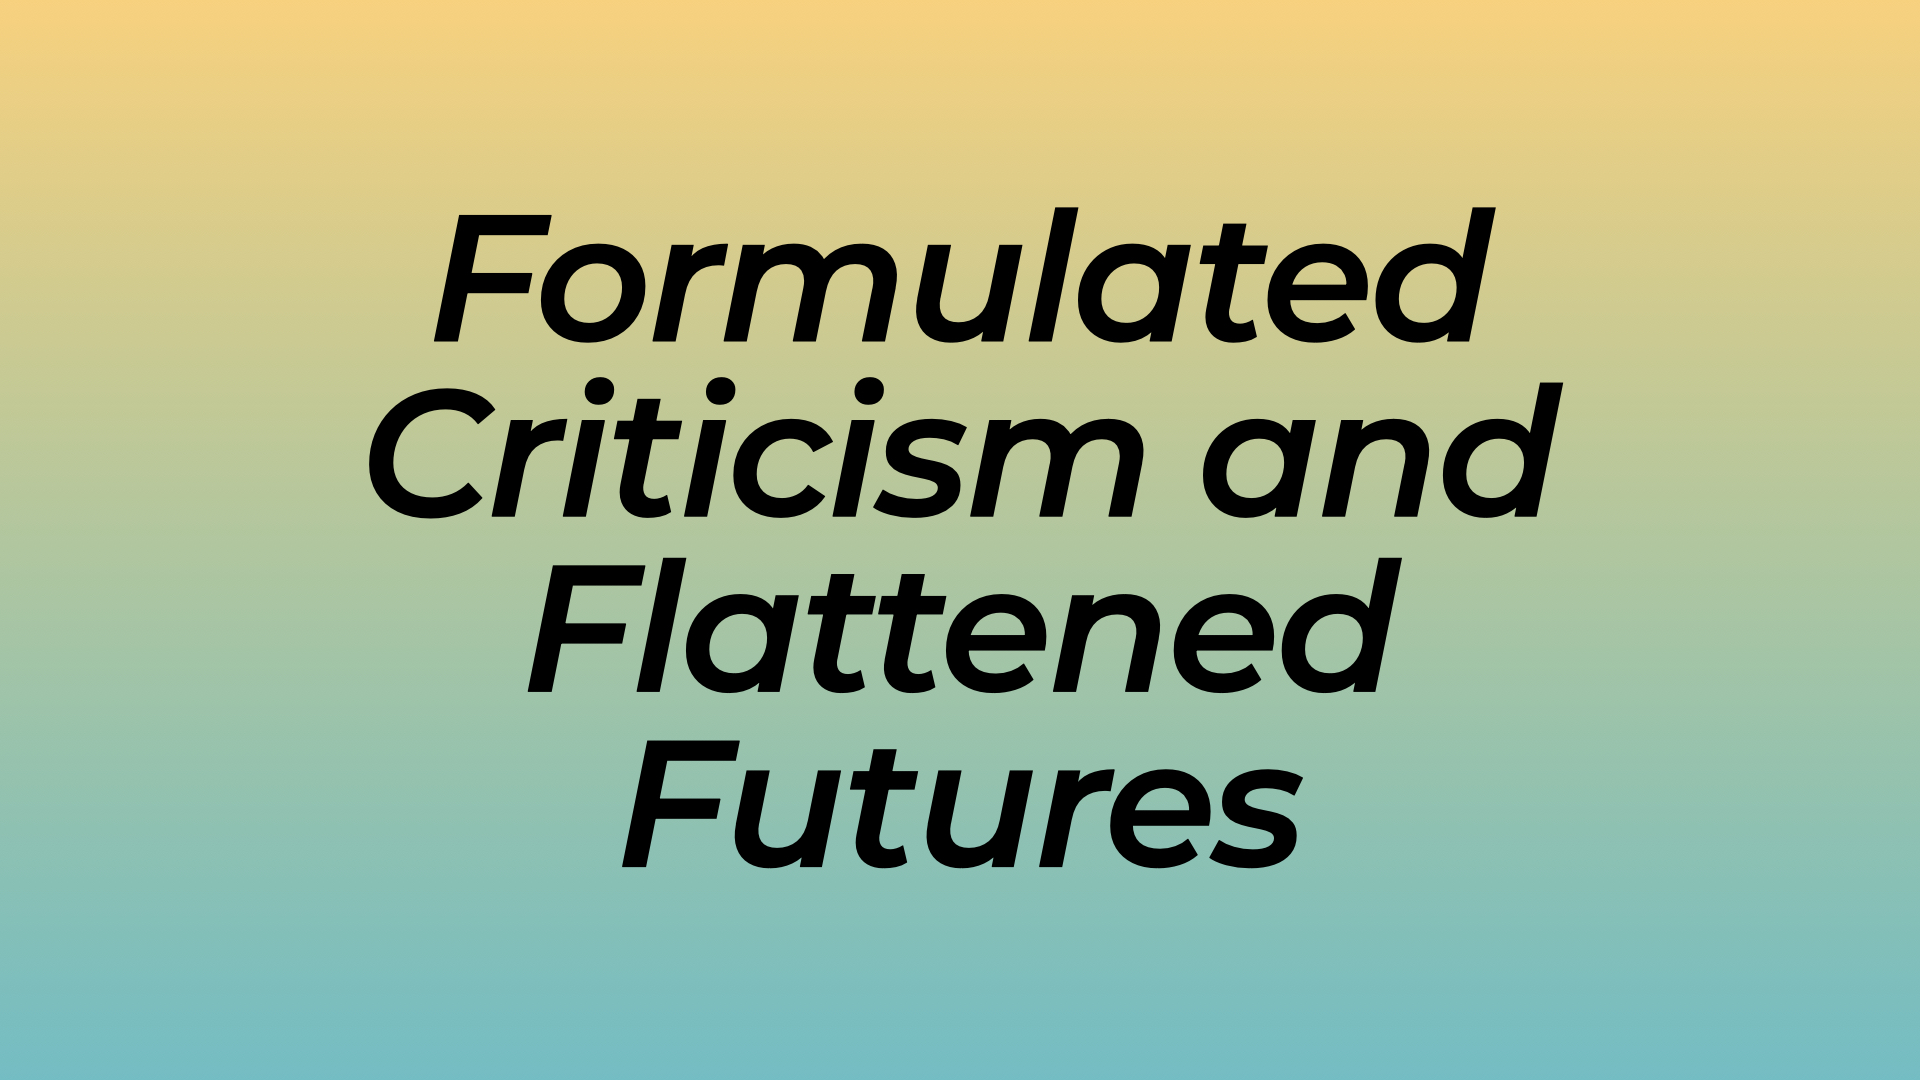 Formulated Criticism and Flattened Futures